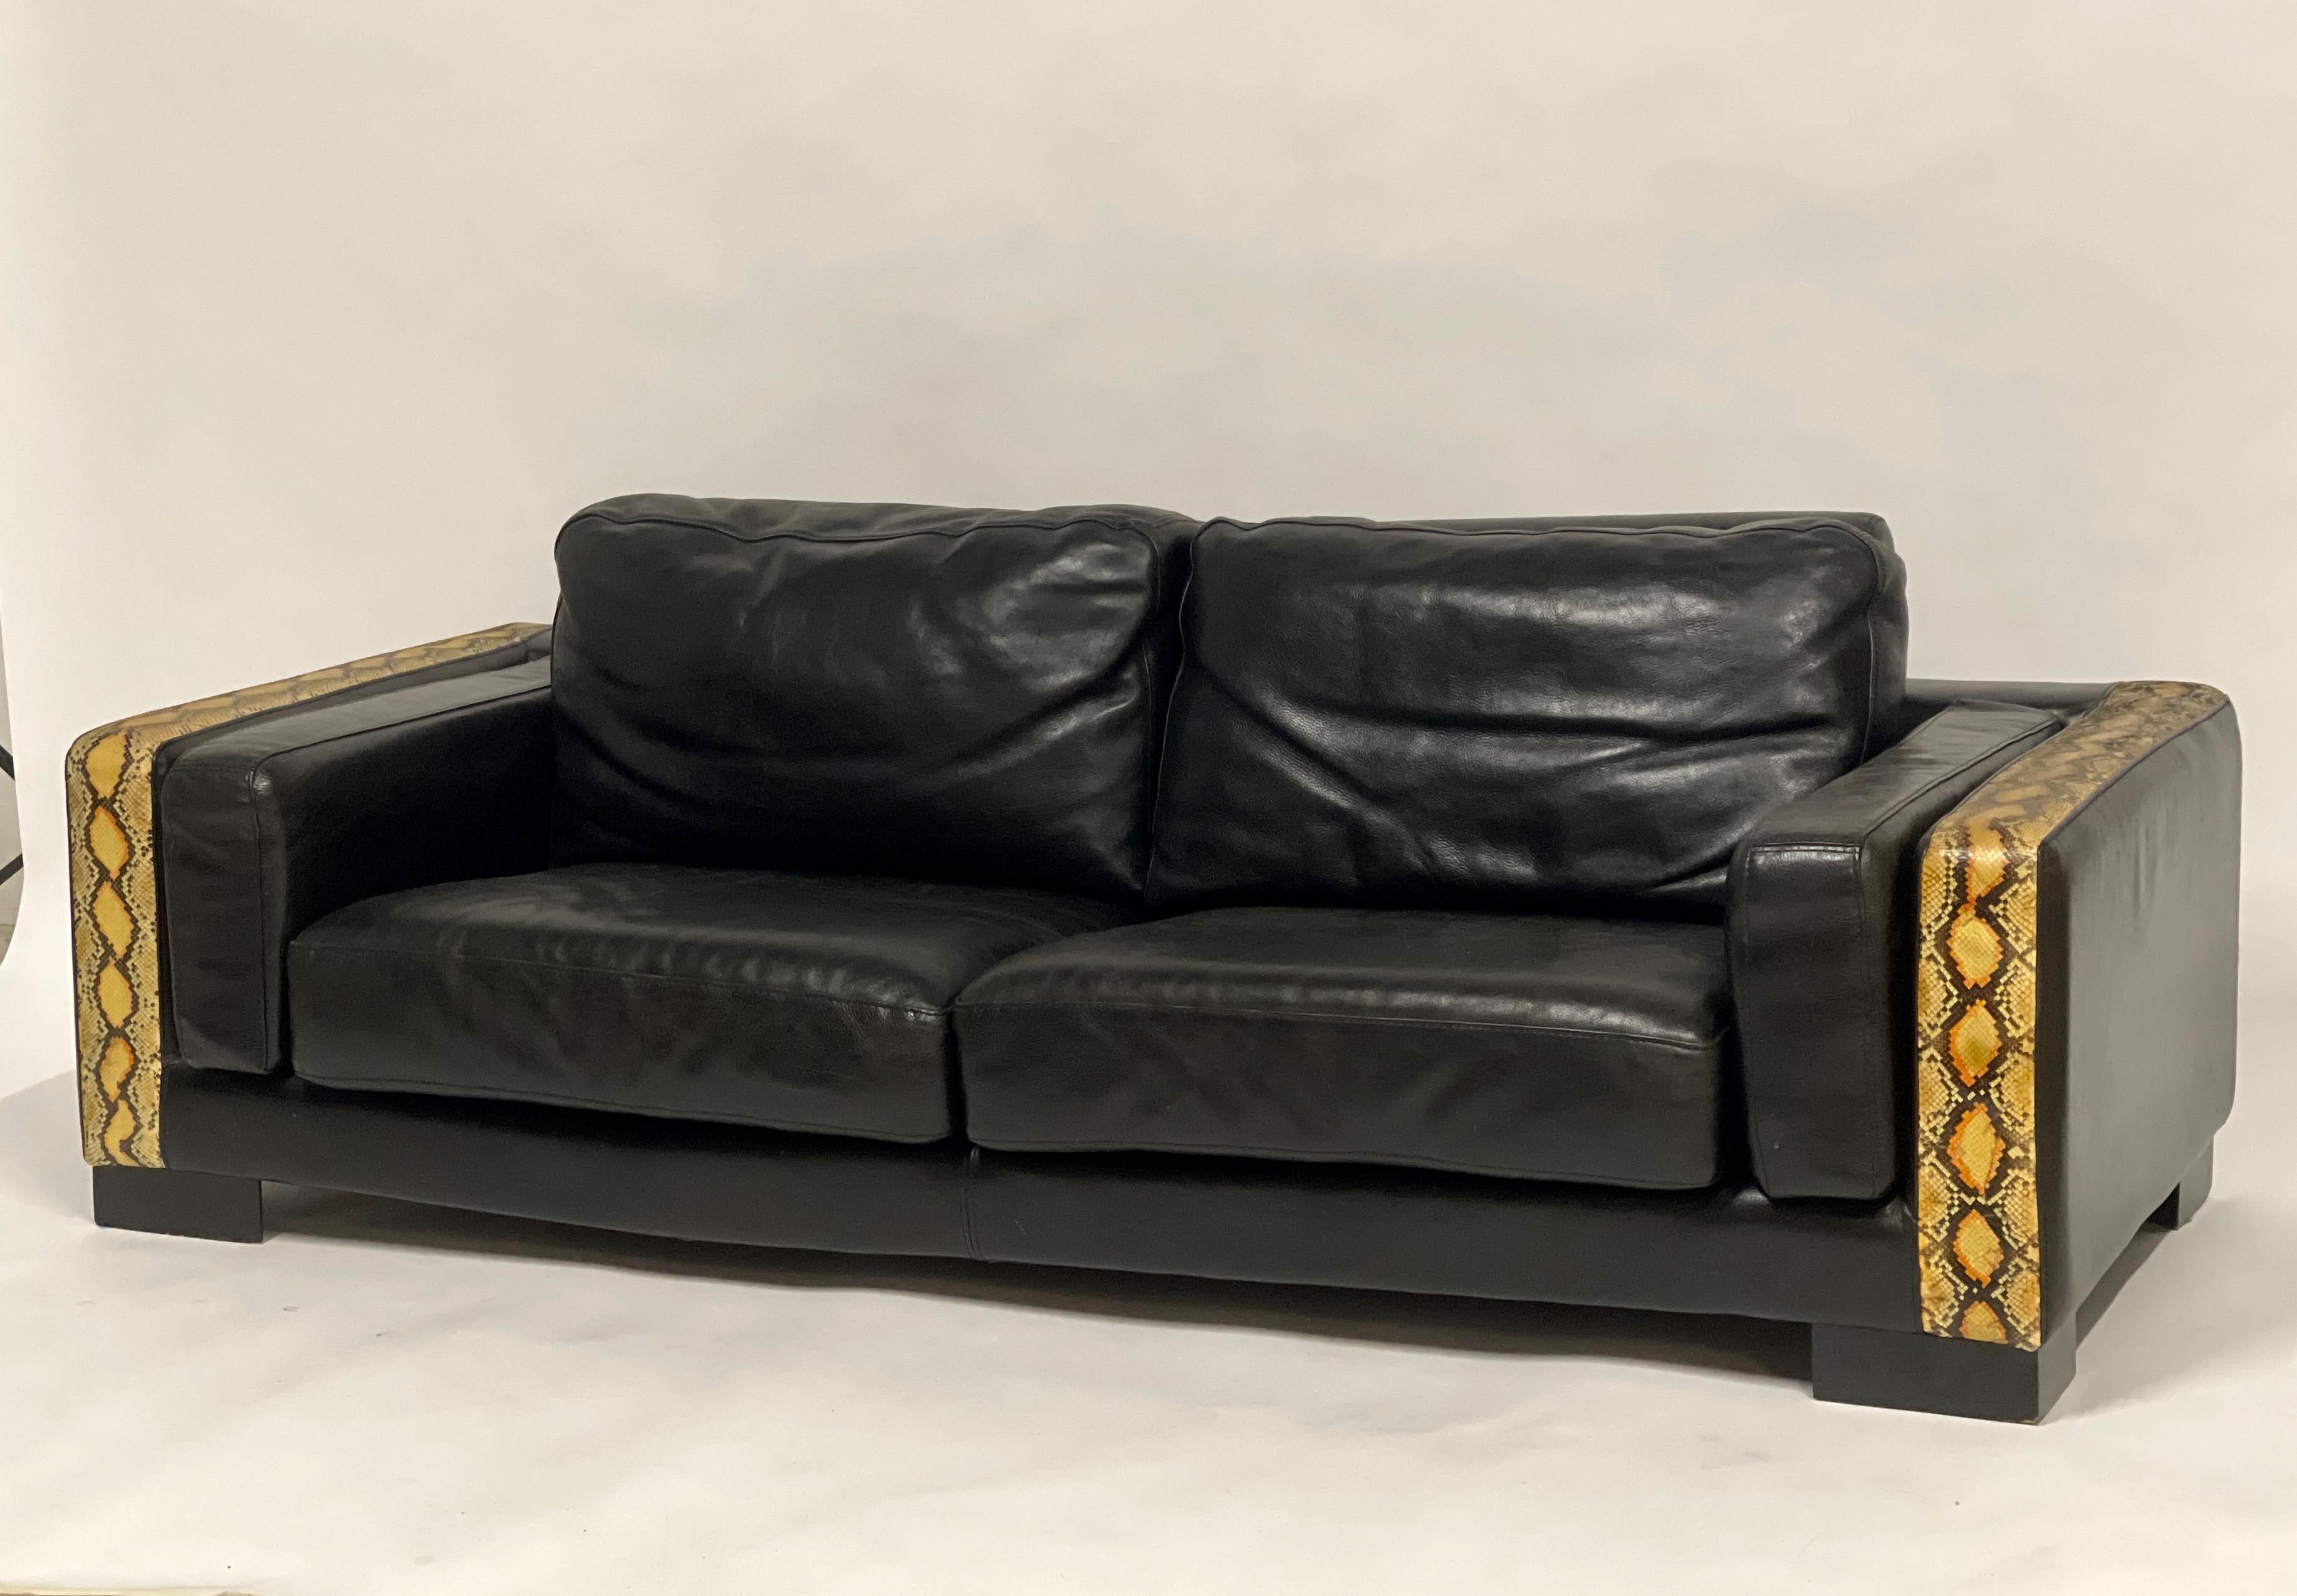 Large scale sofa with butter soft yet durable thick black leather- like a moto jacket. Trim is python embossed leather. This piece is so unique and absolutely stunning in person and so comfortable. 

  